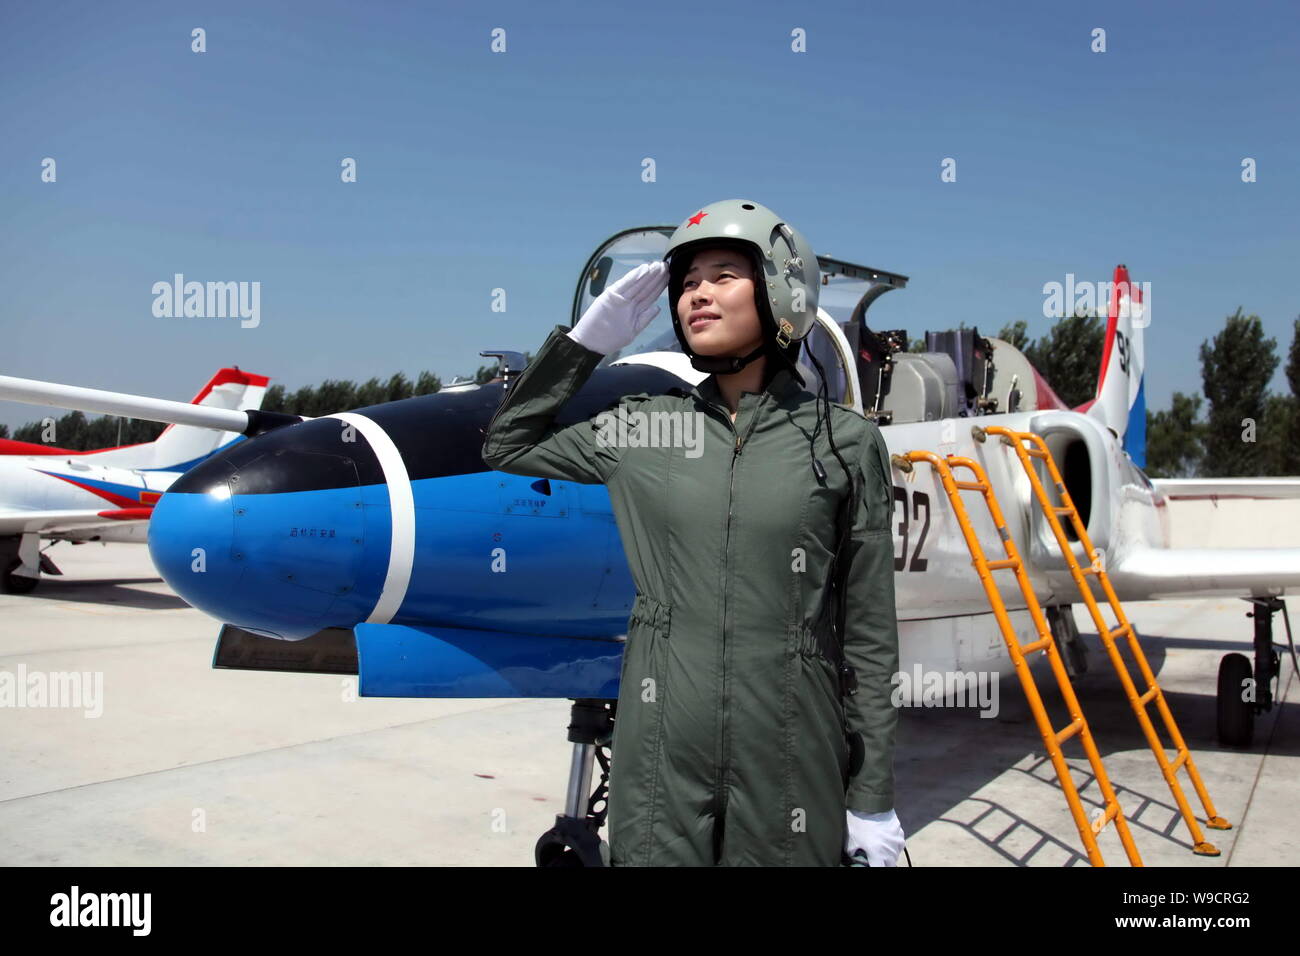 A young female fighter plane pilot of Chinese PLA Air Force salutes next to a training plane after a new flight suits delivery ceremony at an airport Stock Photo